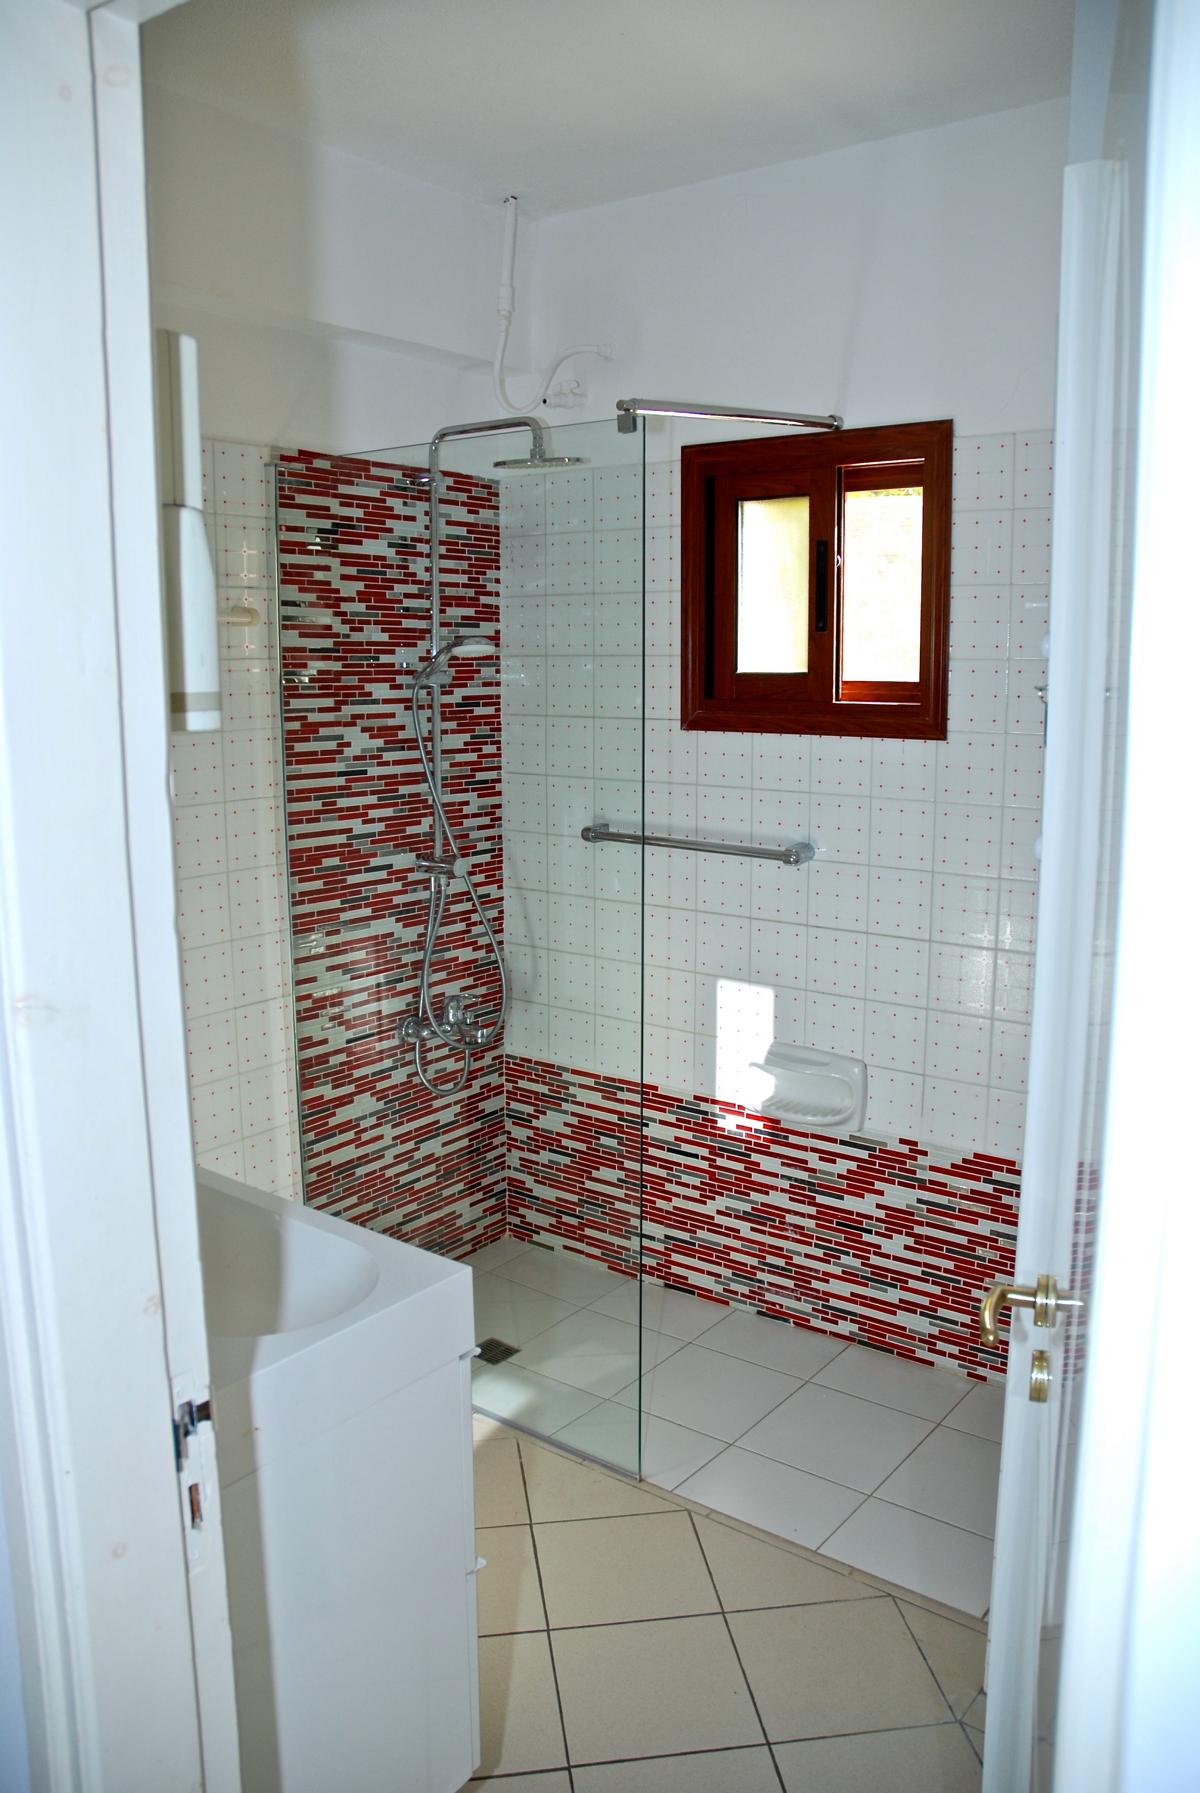 Bathroom inside with WC and shower